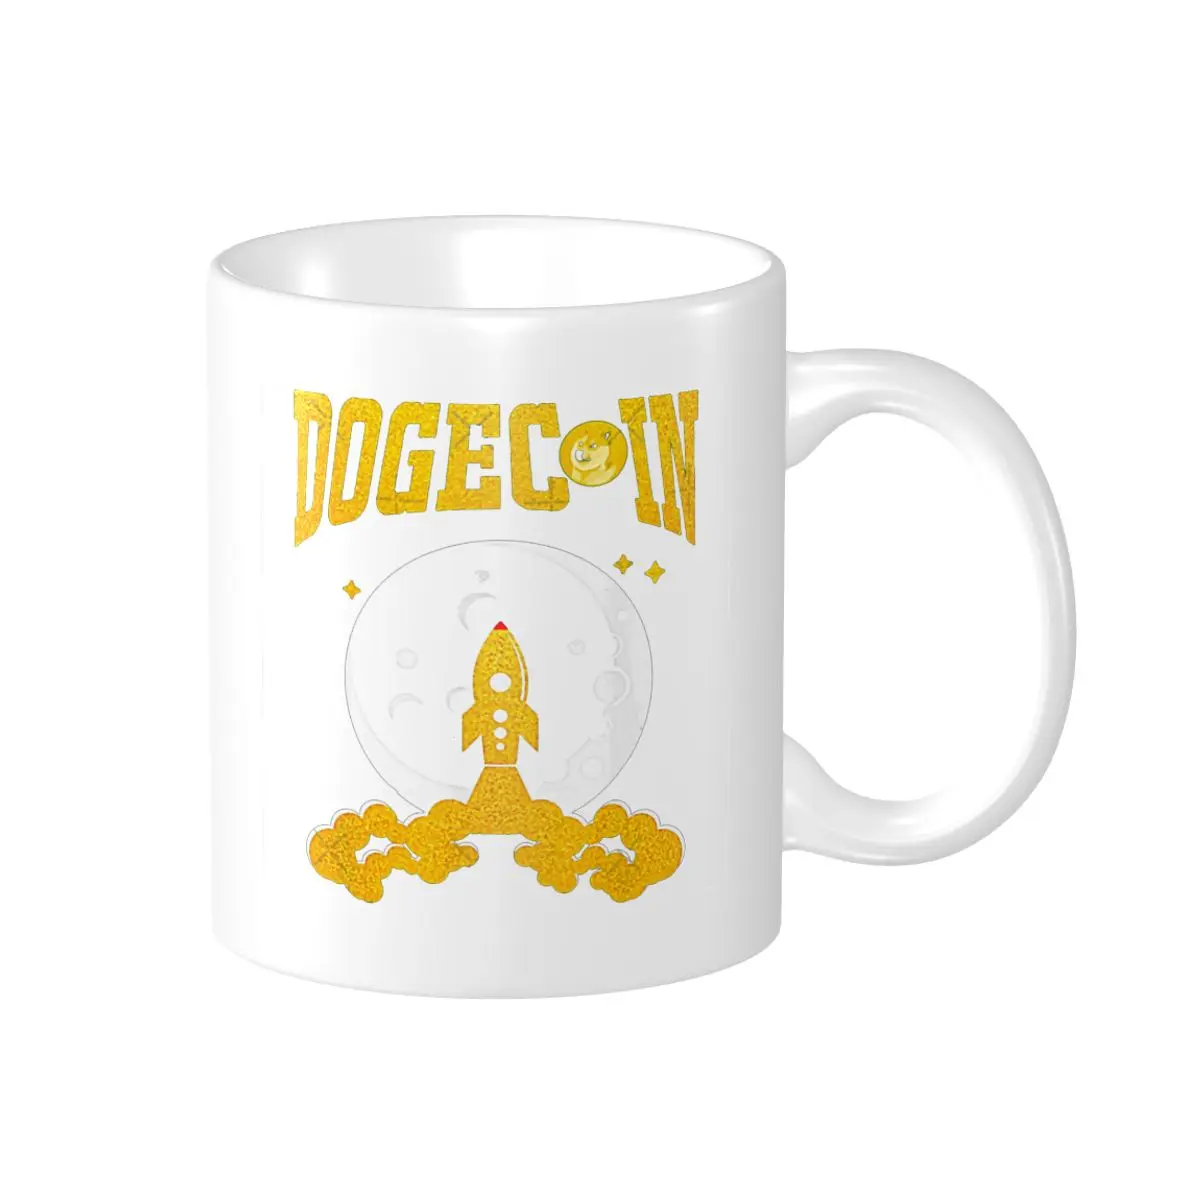 

Promo Dogecoin To The Moon (4) Mugs Graphic Vintage Cups CUPS Print Humor Graphic R376 multi-function cups